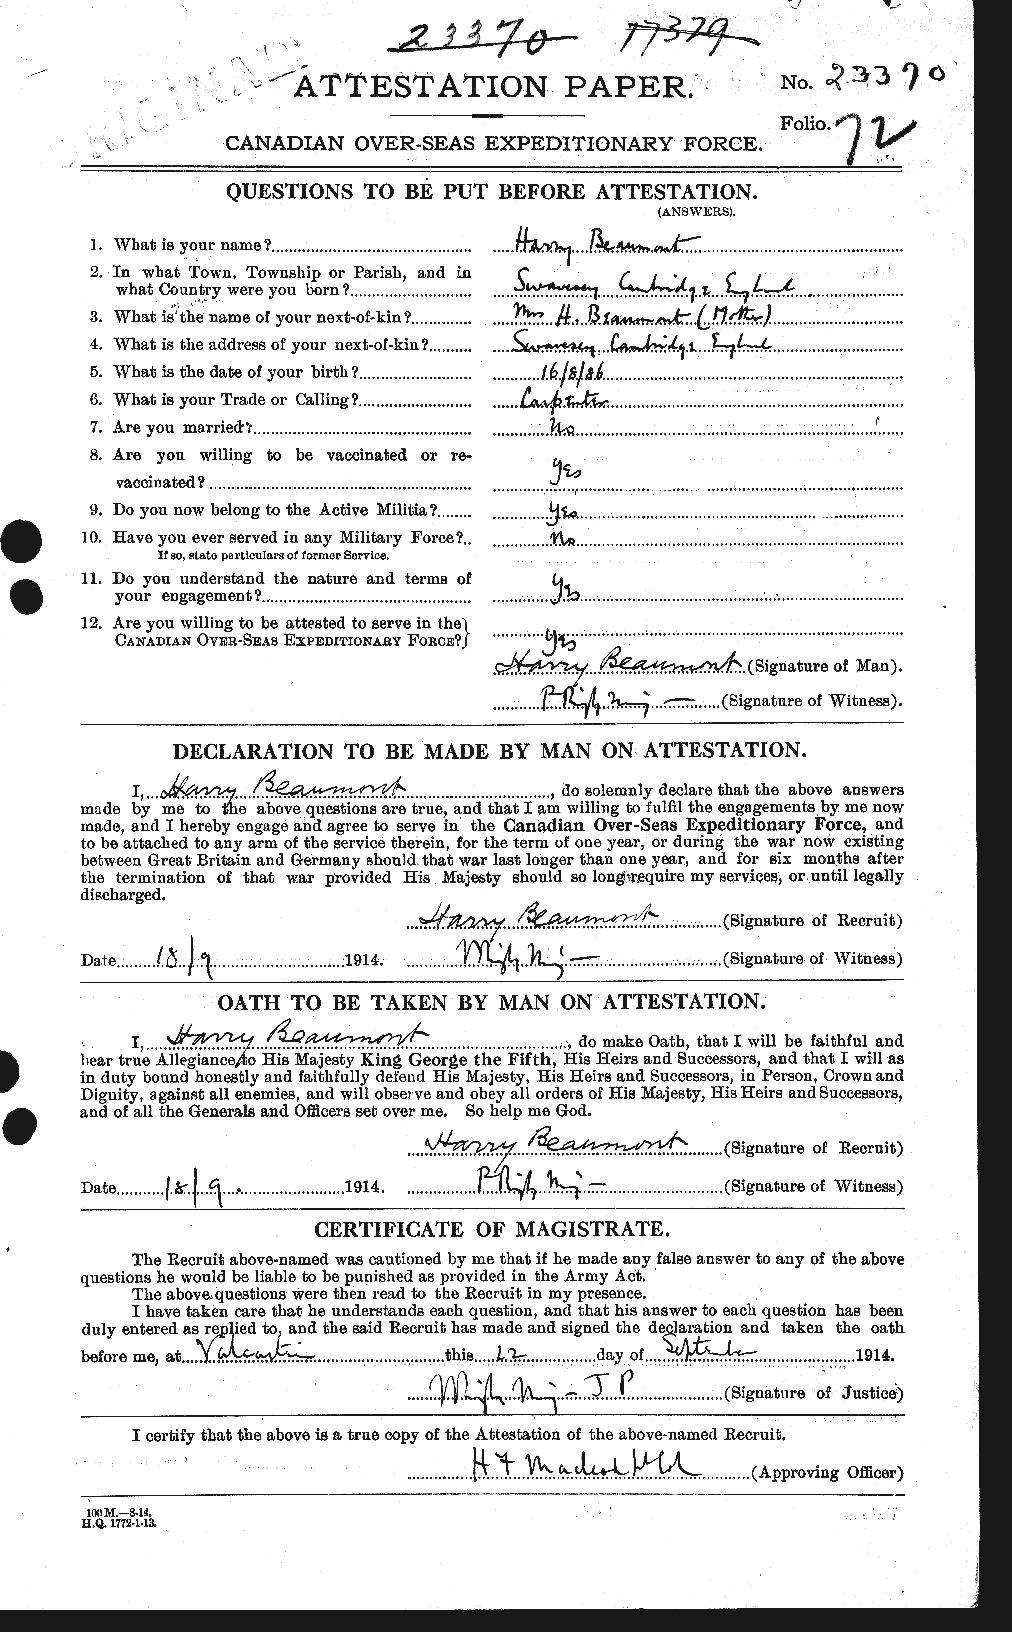 Personnel Records of the First World War - CEF 231673a